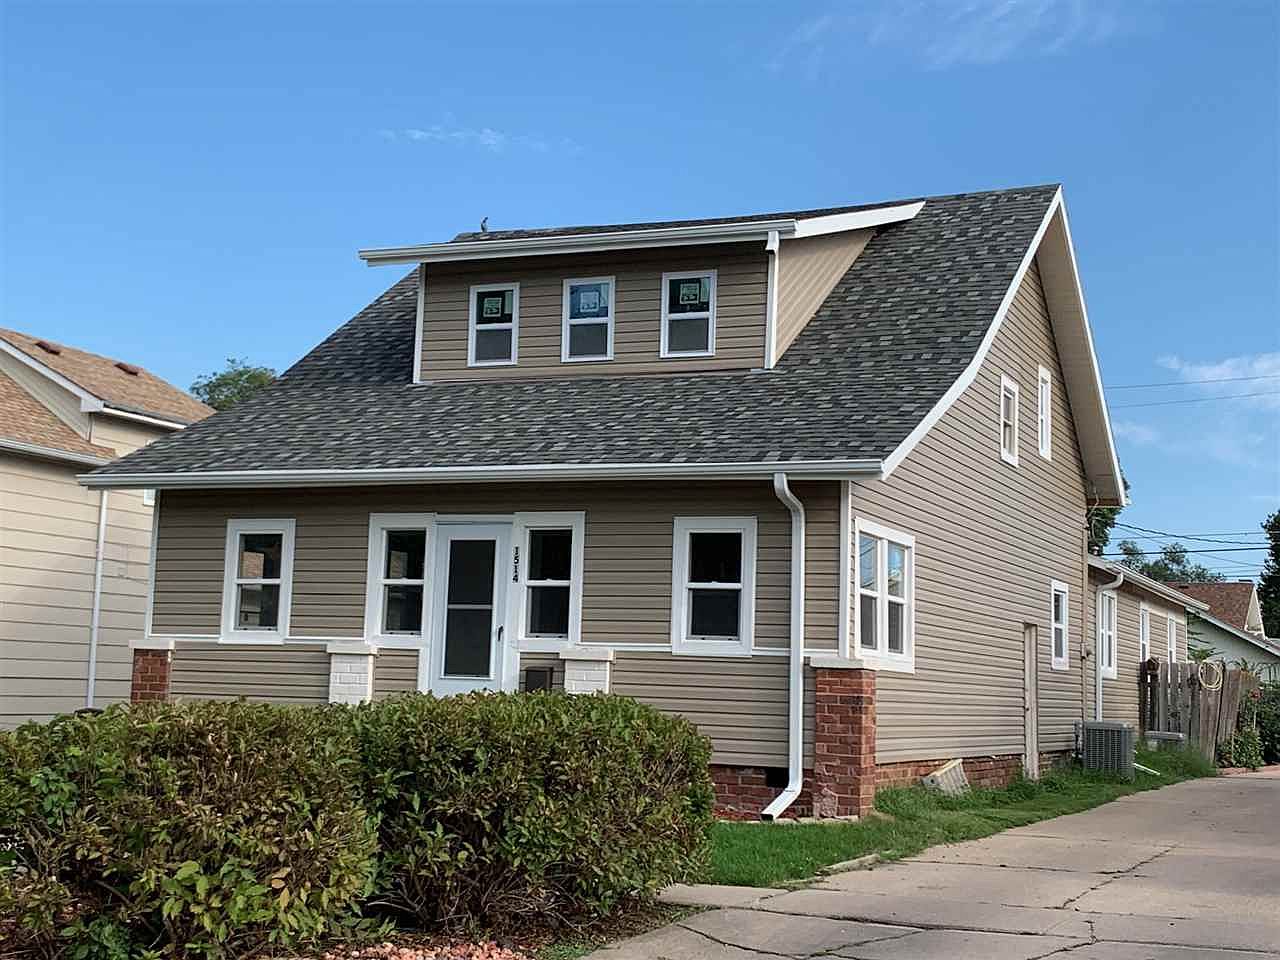 1514 W 5th St Hastings Ne 68901 Zillow